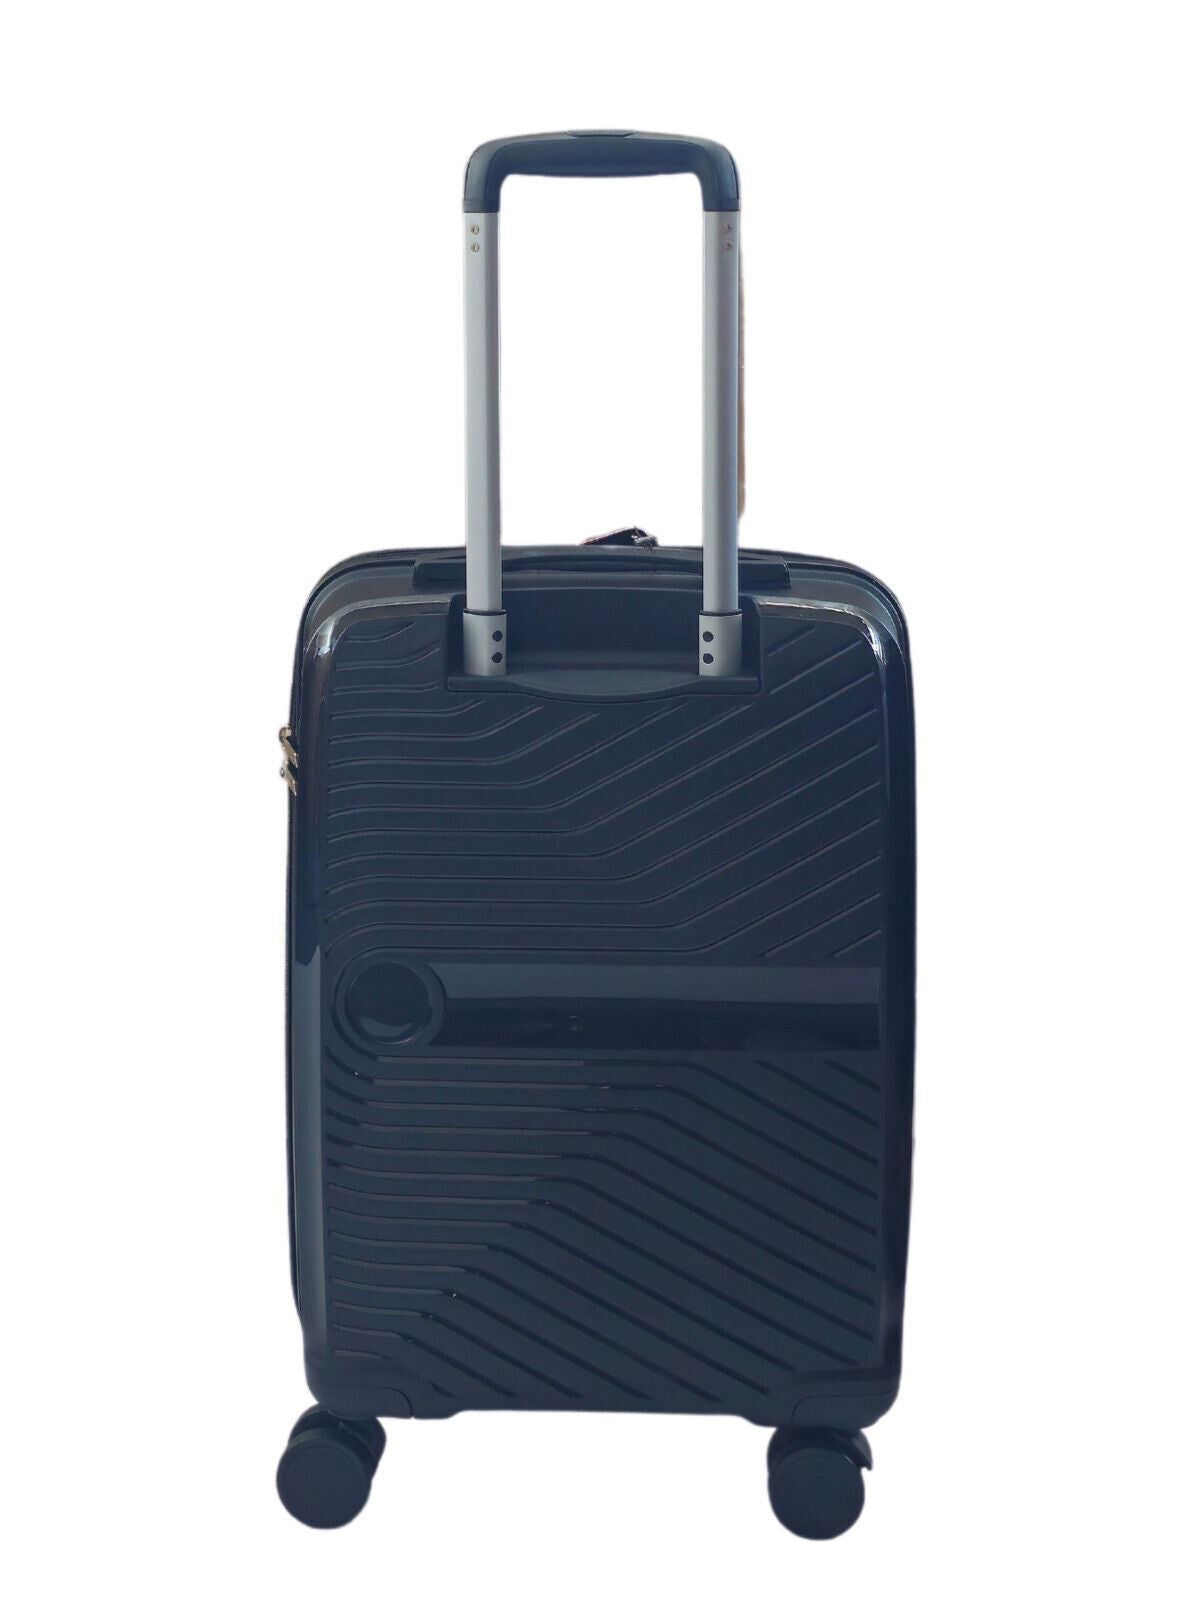 Abbeville Cabin Hard Shell Suitcase in Black